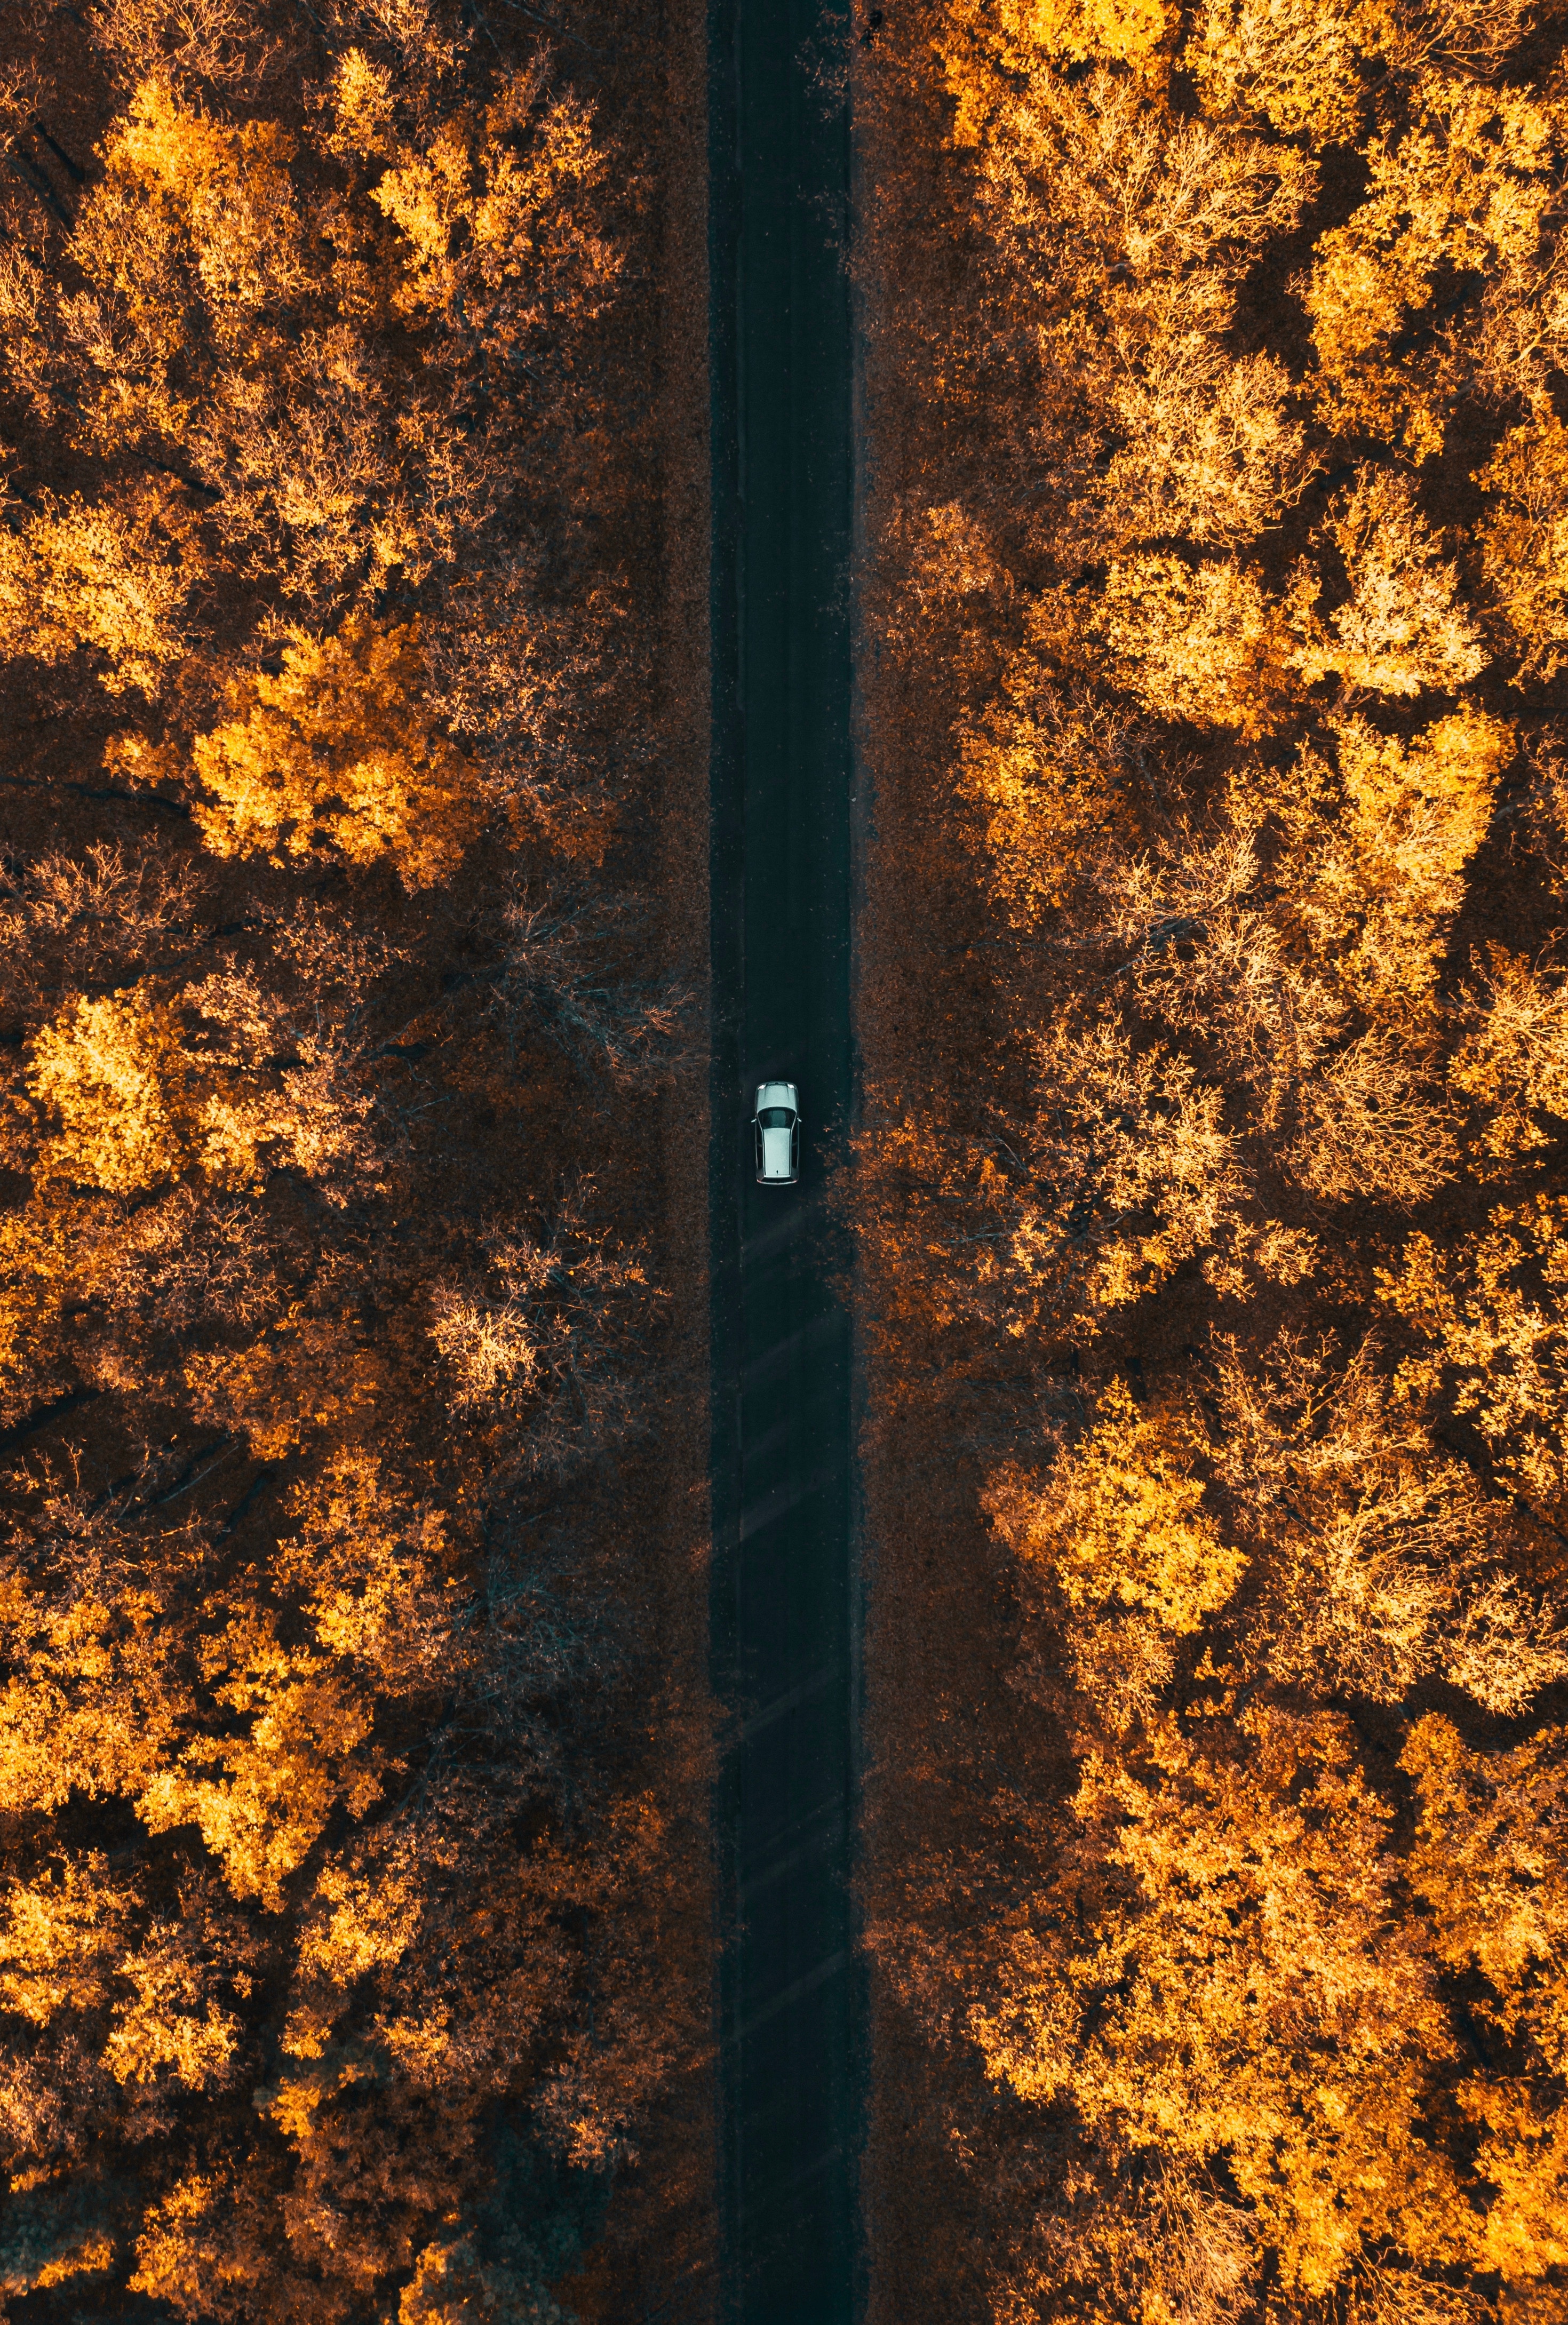 nature, trees, autumn, view from above, road, forest, car, machine, down below, below